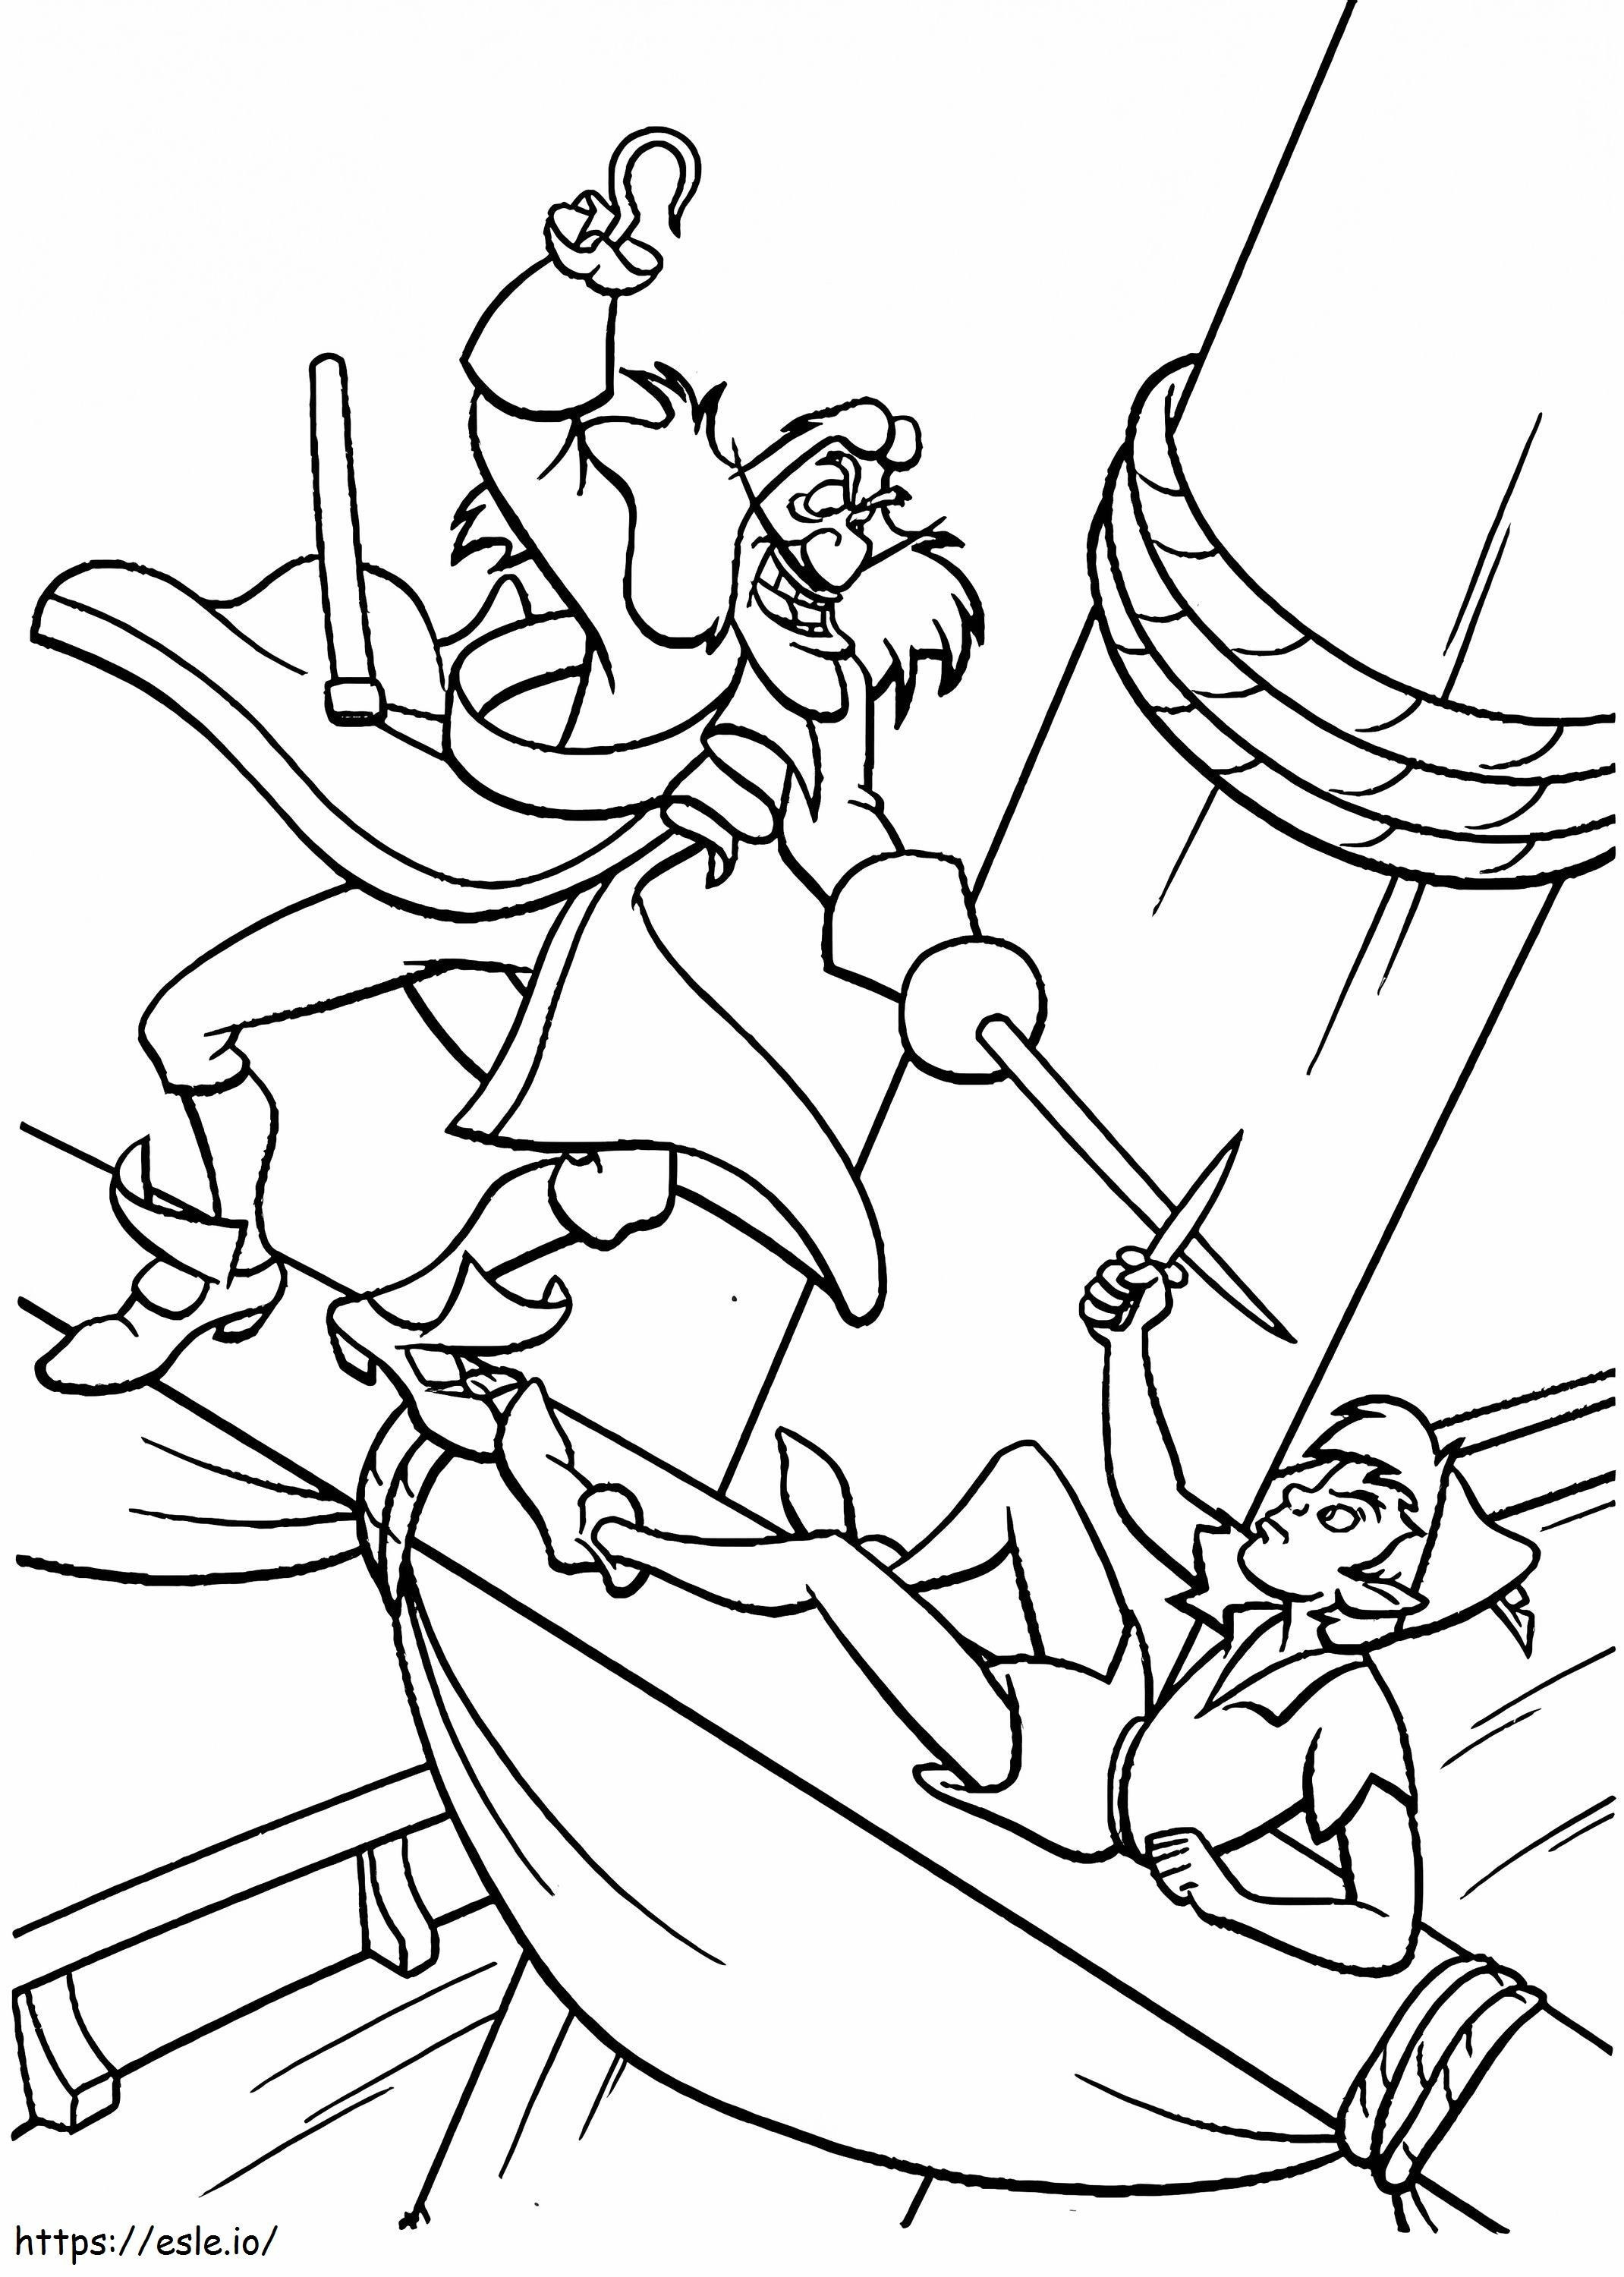 1545726986 Peter Pan Excellent Amusing coloring page